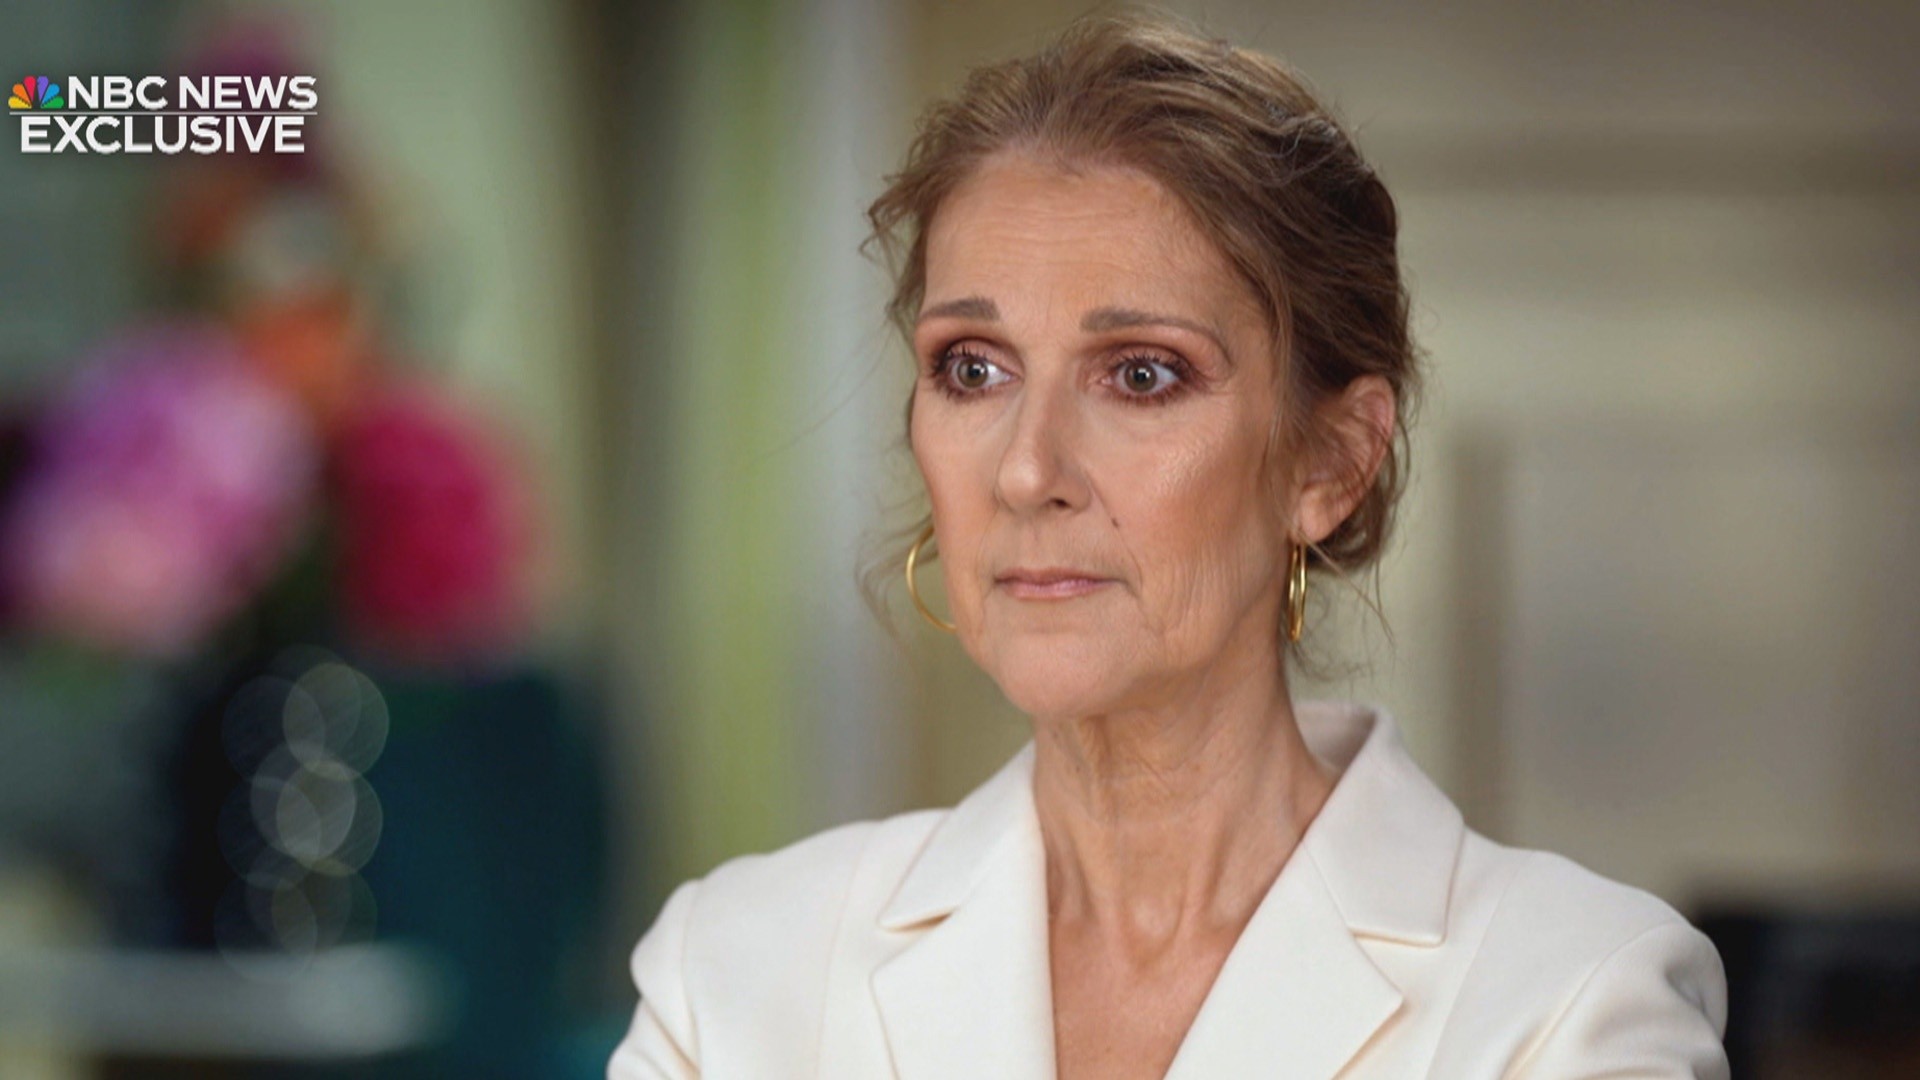 See a first look at Hoda Kotb's interview with Celine Dion